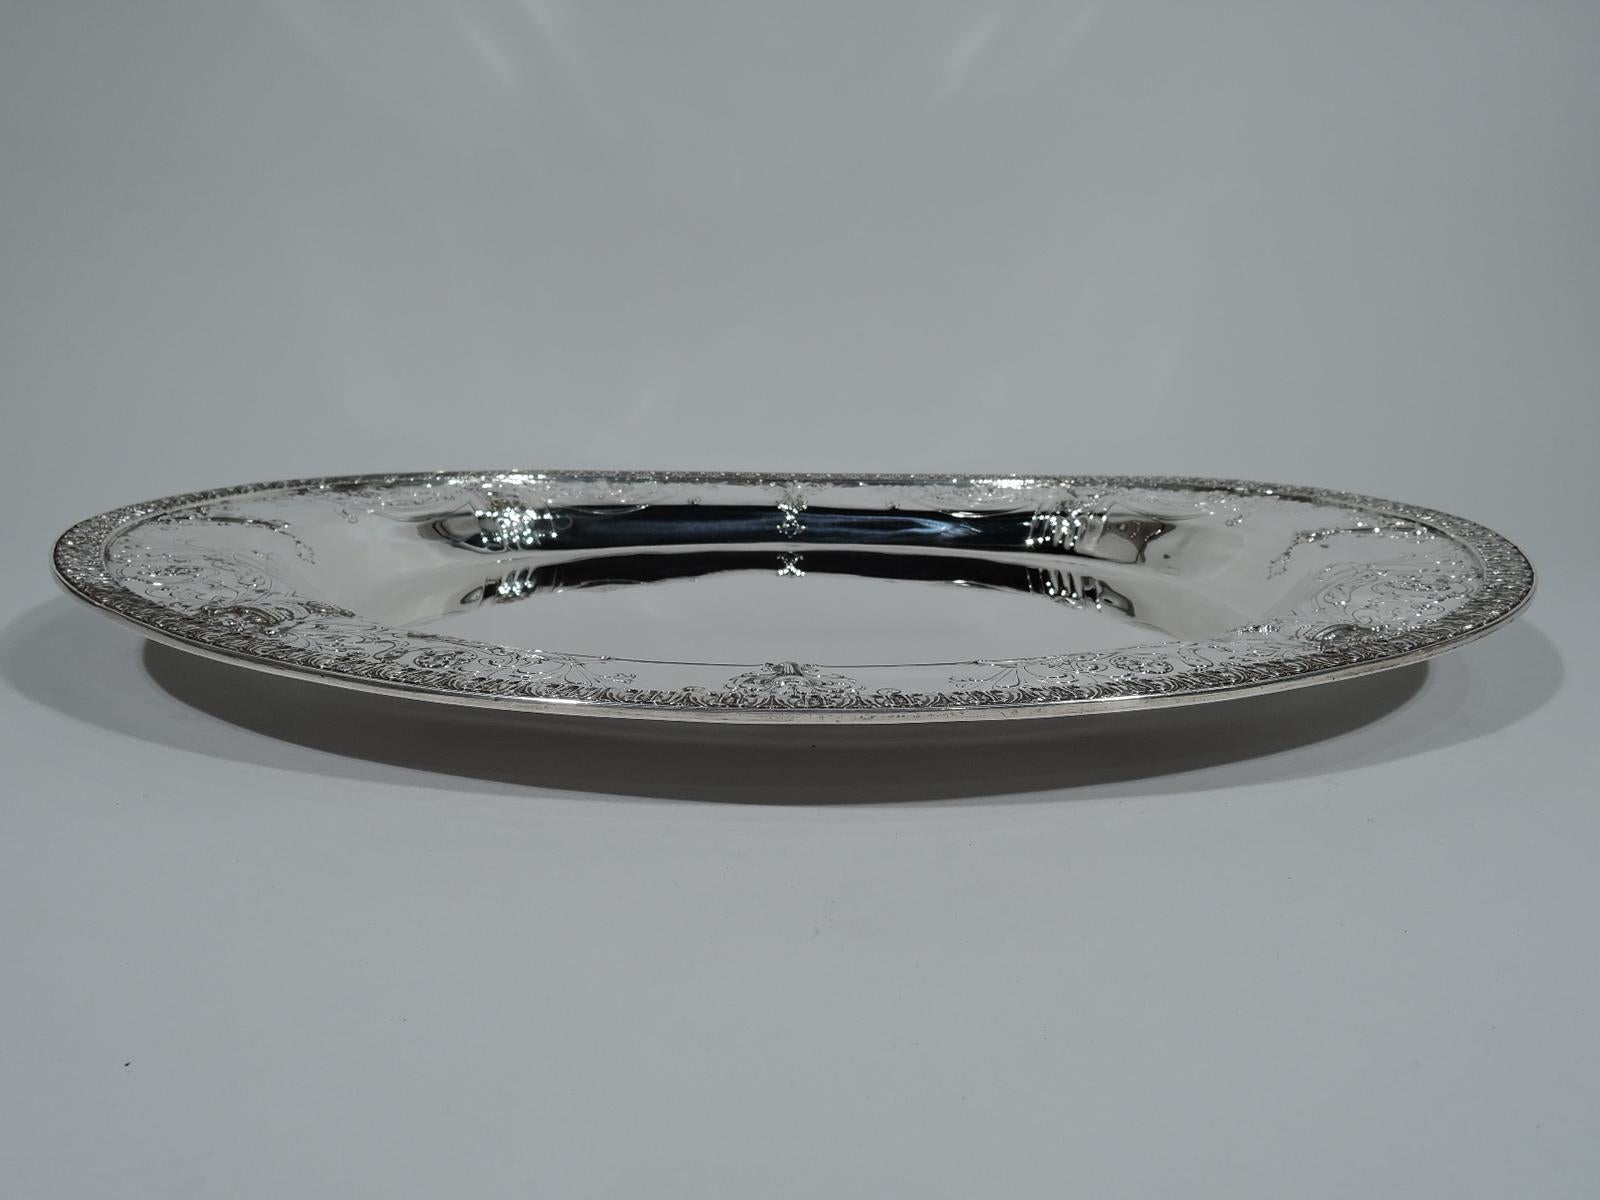 Regency Revival sterling silver serving tray. Made by Black, Starr & Frost in New York, circa 1910. Oval well and wide shoulder with loosely chased covered vases, paterae, foliage, and flowers. Leaf-and-dart rim. Fully marked including no. 1452/8.